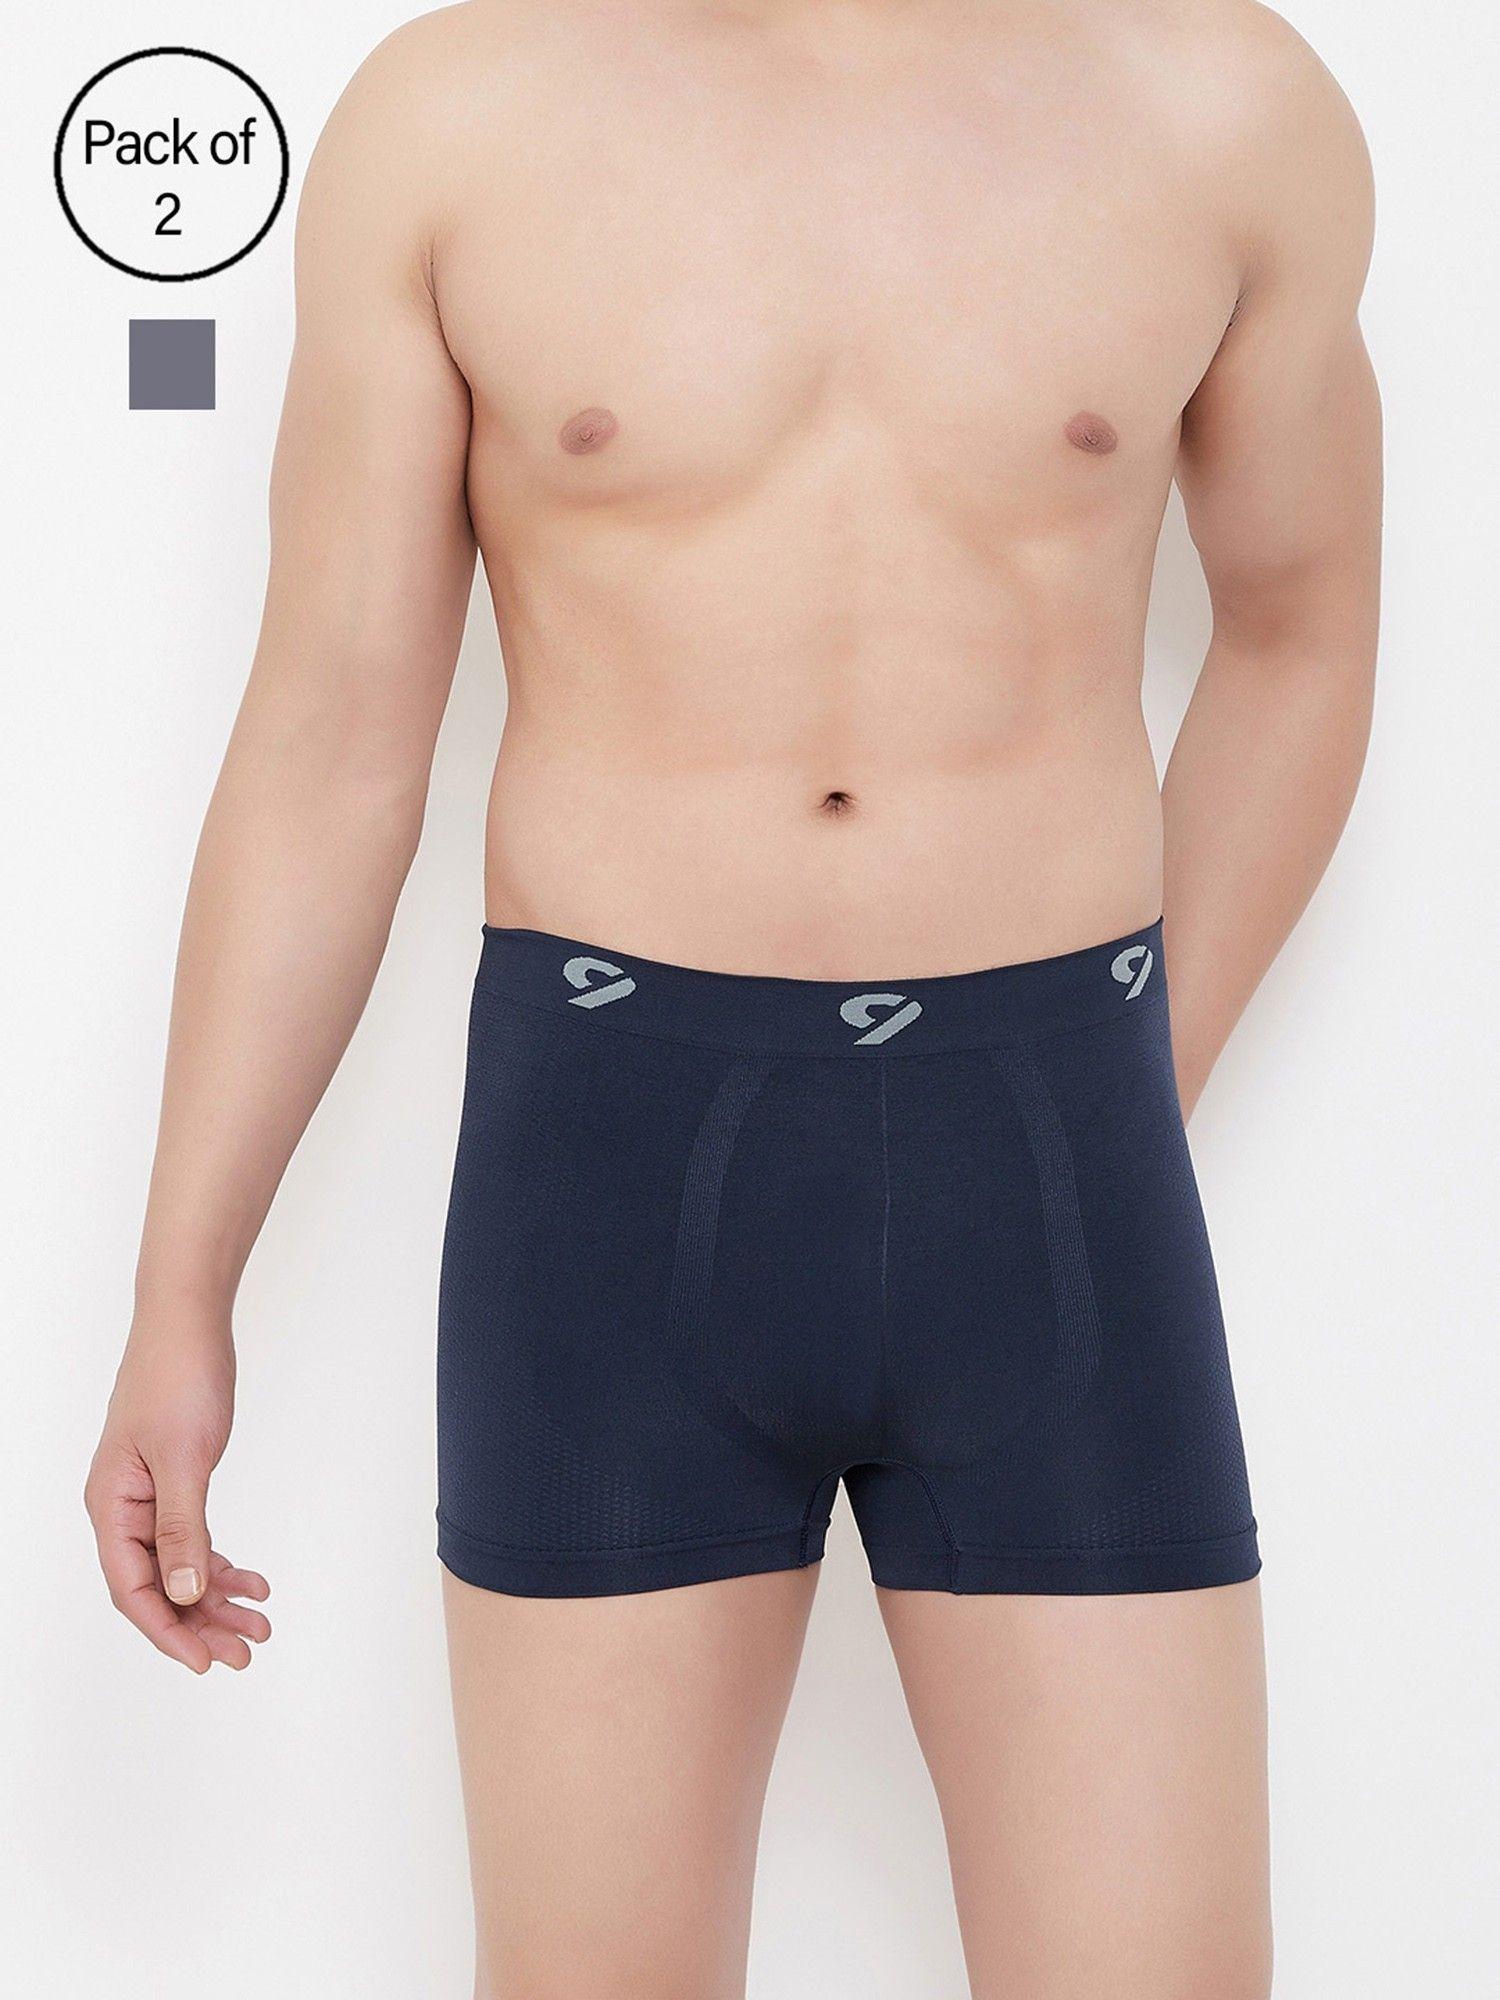 mens trunks grey and navy blue (set of 2)